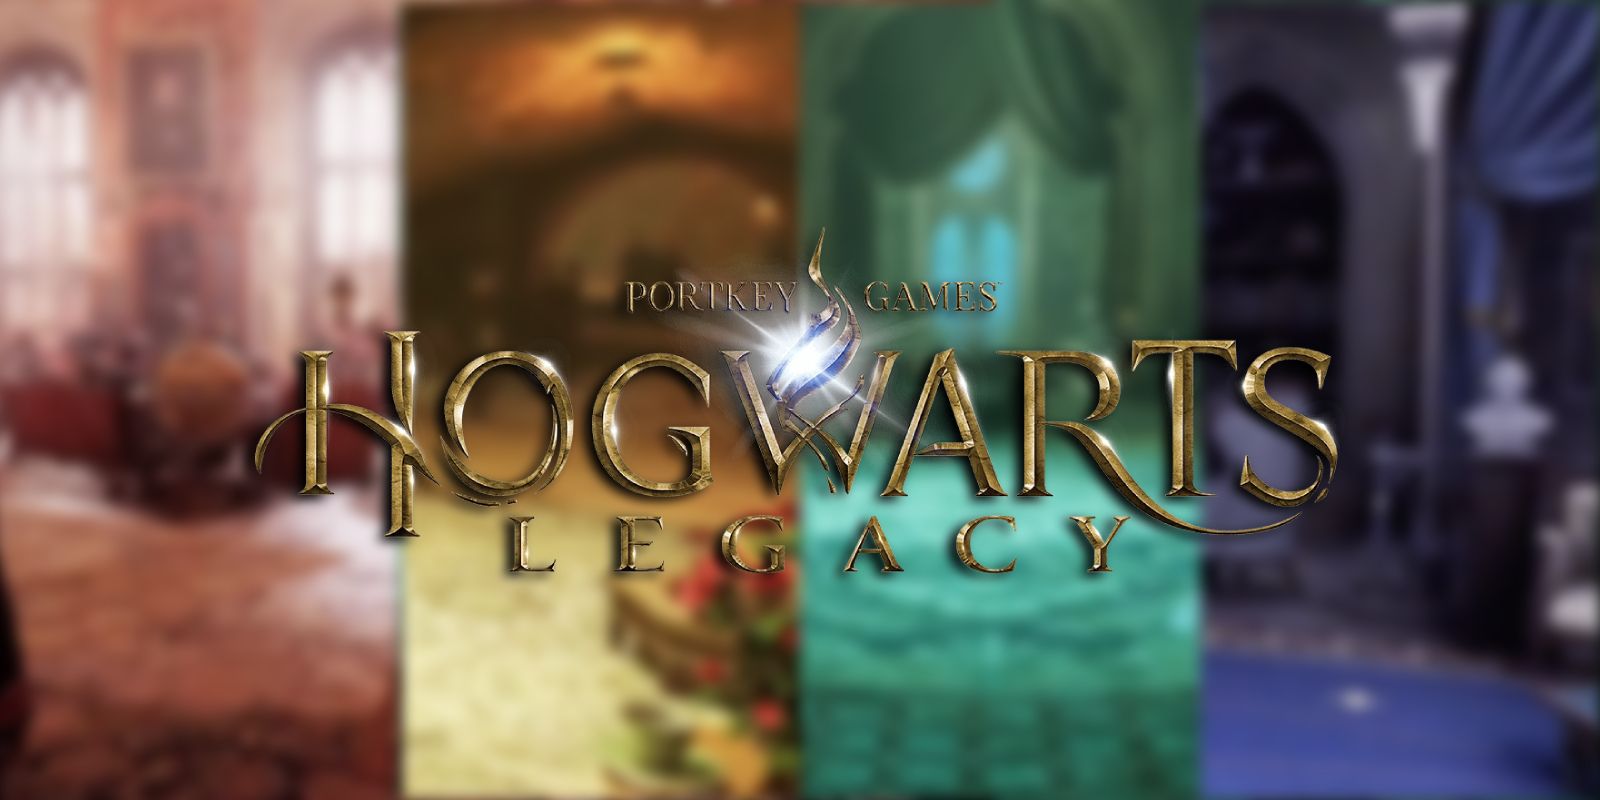 The logo for Hogwarts Legacy over a blurry image of all four common rooms of the Hogwarts Houses